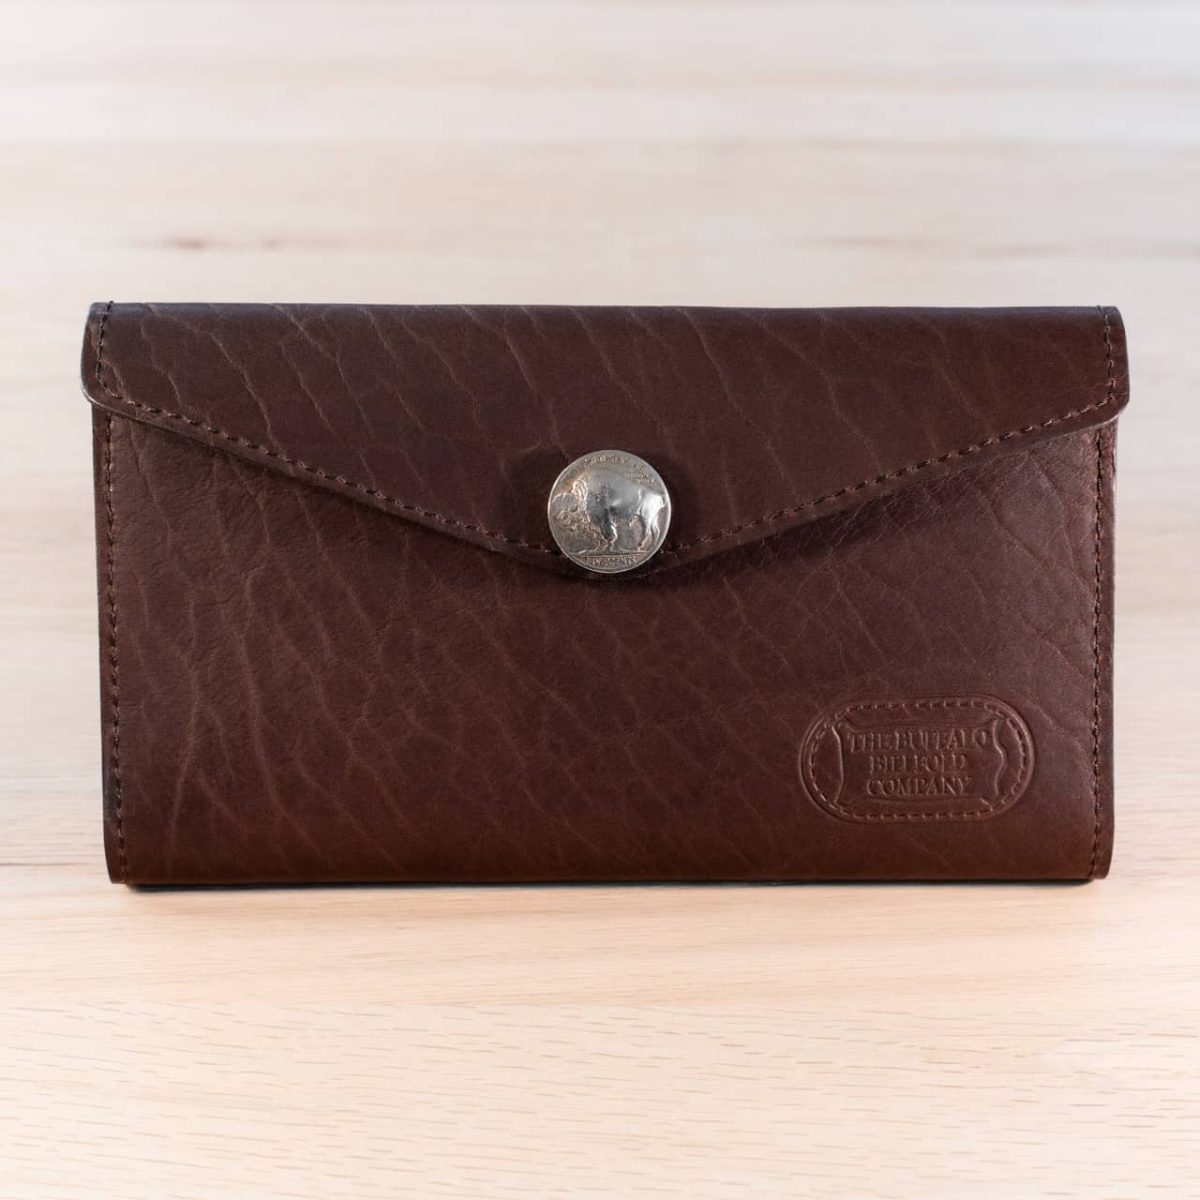 A buyer's guide to women's wallets made in the USA